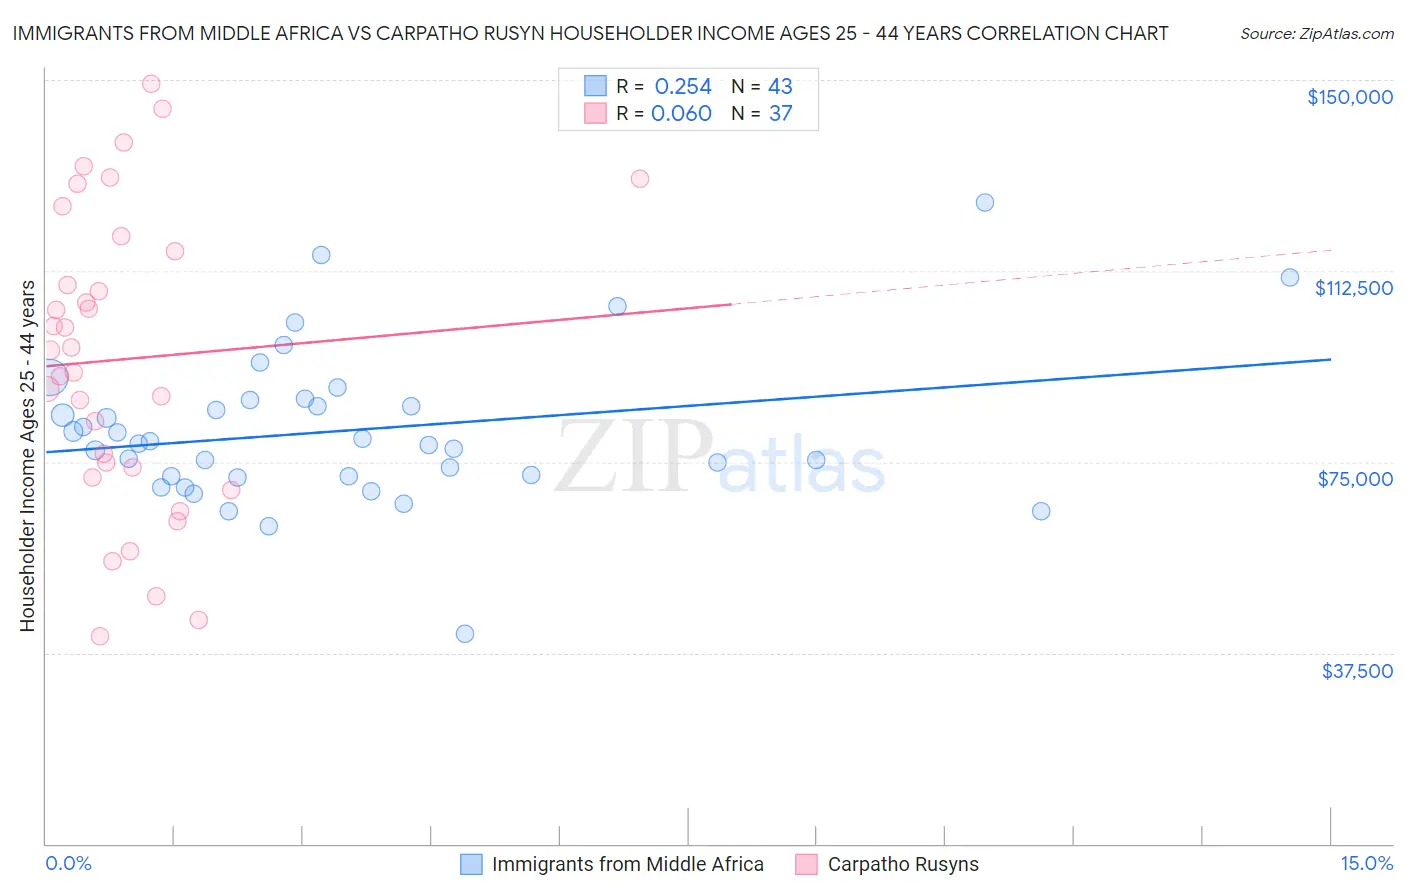 Immigrants from Middle Africa vs Carpatho Rusyn Householder Income Ages 25 - 44 years